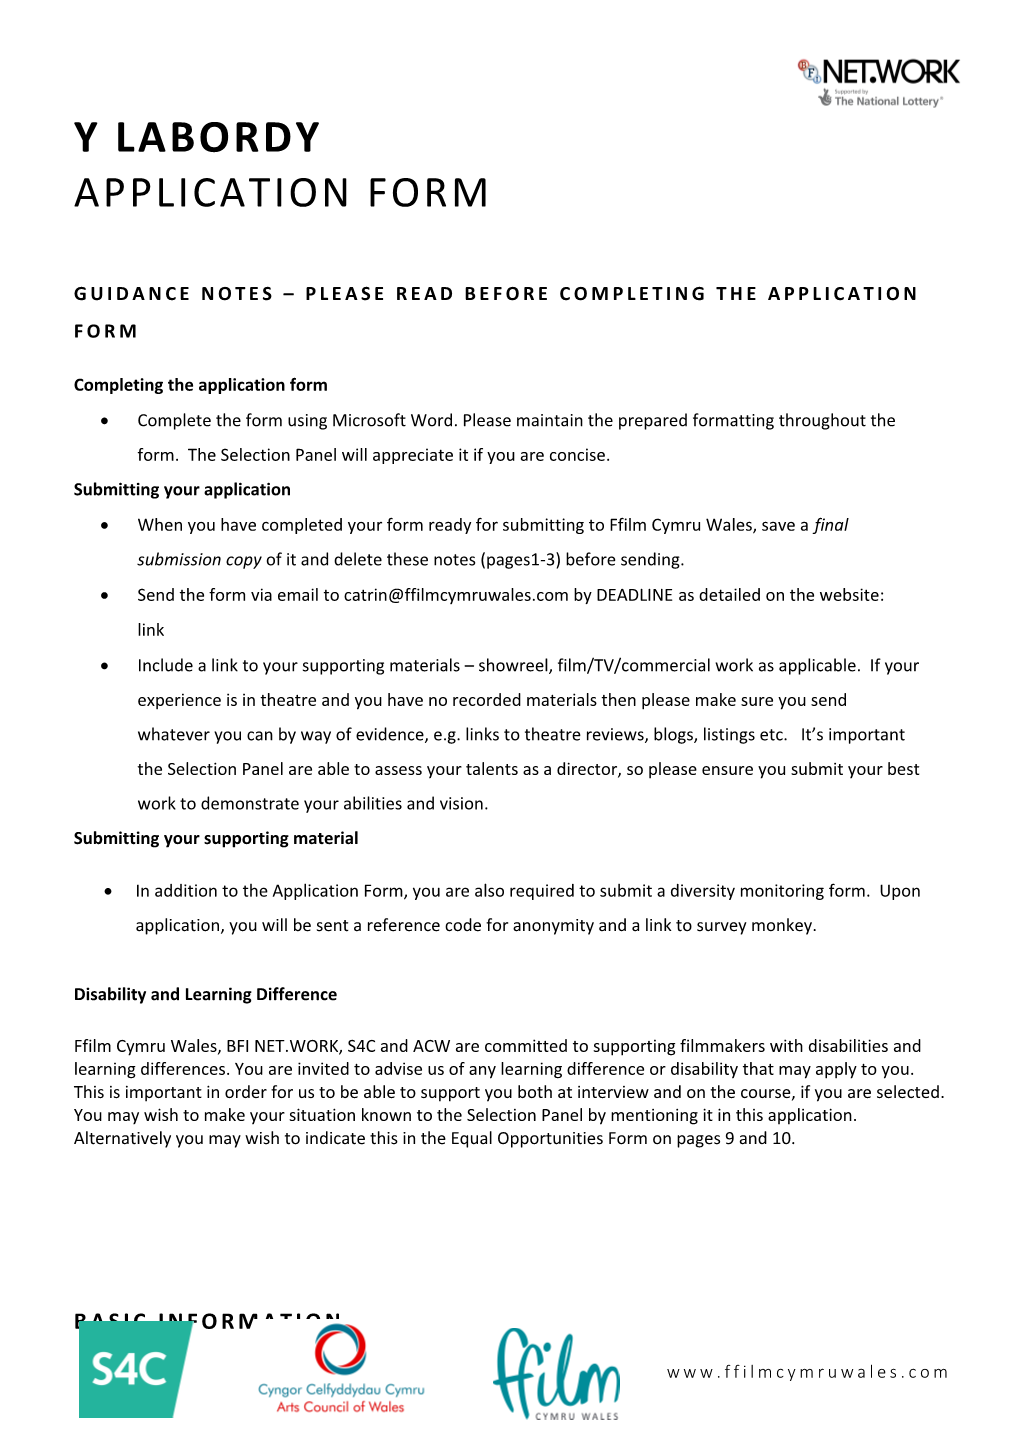 Guidance Notes Please Read Before Completing the Application Form